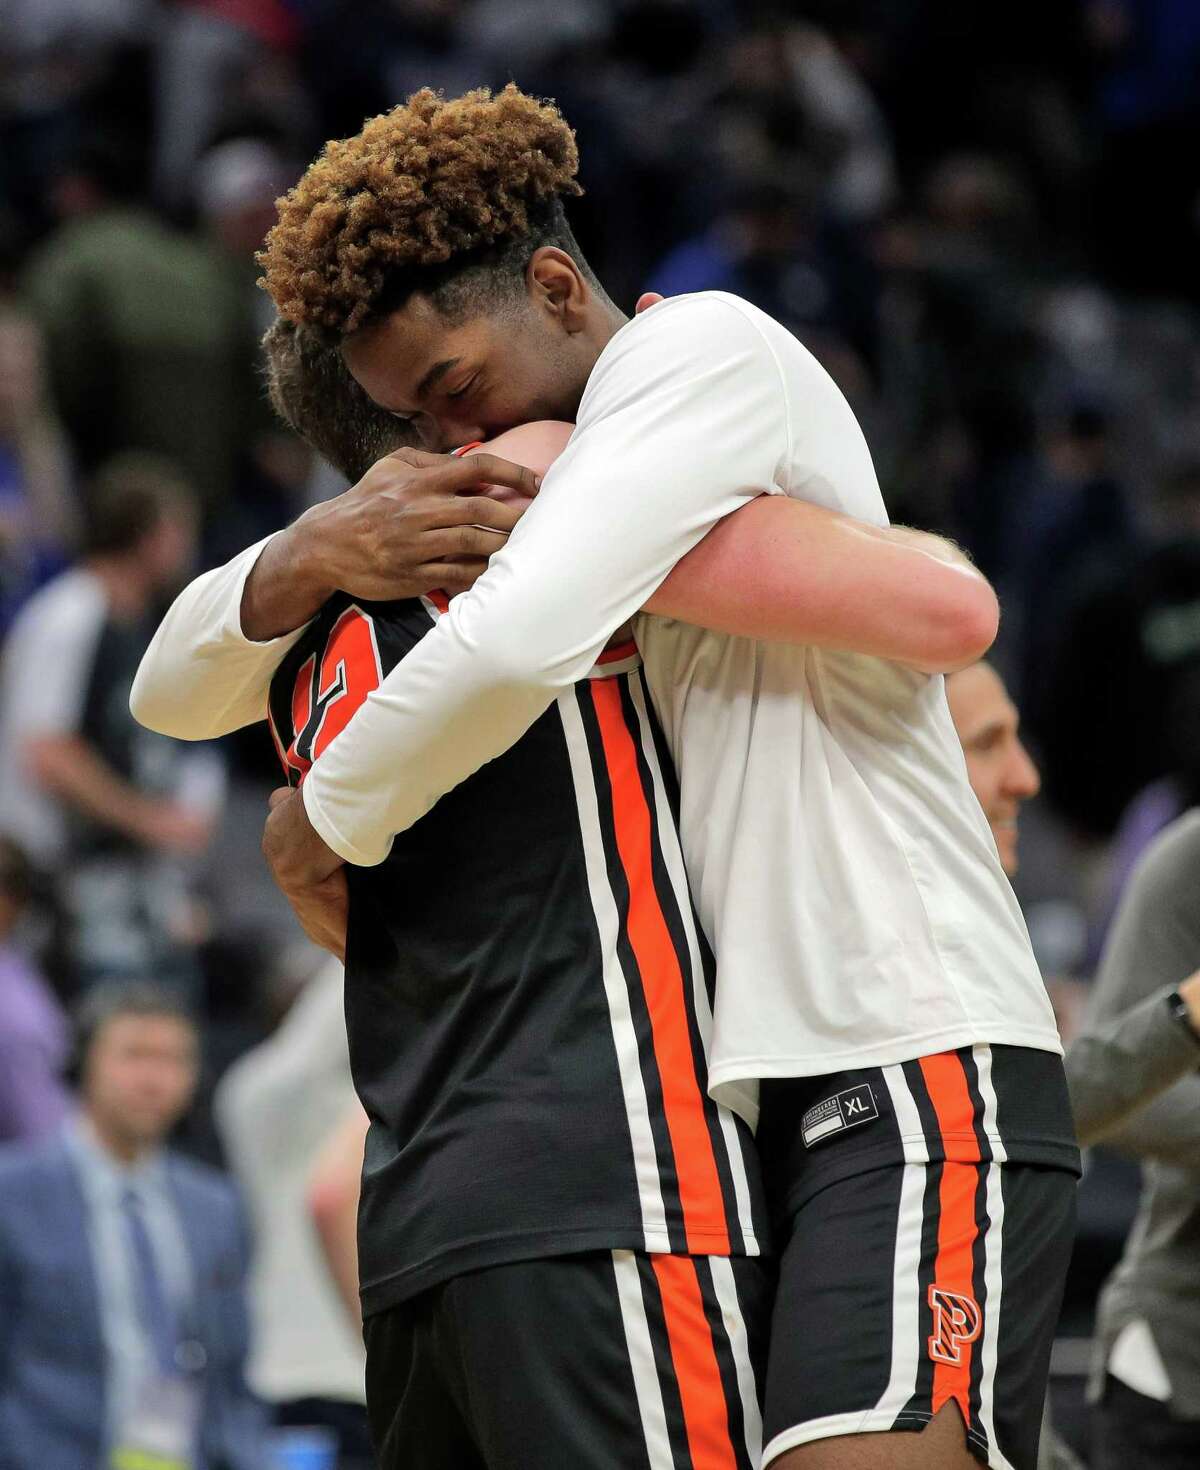 Princeton's Vernon Collins (33) hugs Caden Pierce (12) after the Tigers defeated Arizona   59-55 in the first round 2023 NCAA Men’s Basketball tournament at Golden 1 Center in Sacramento.